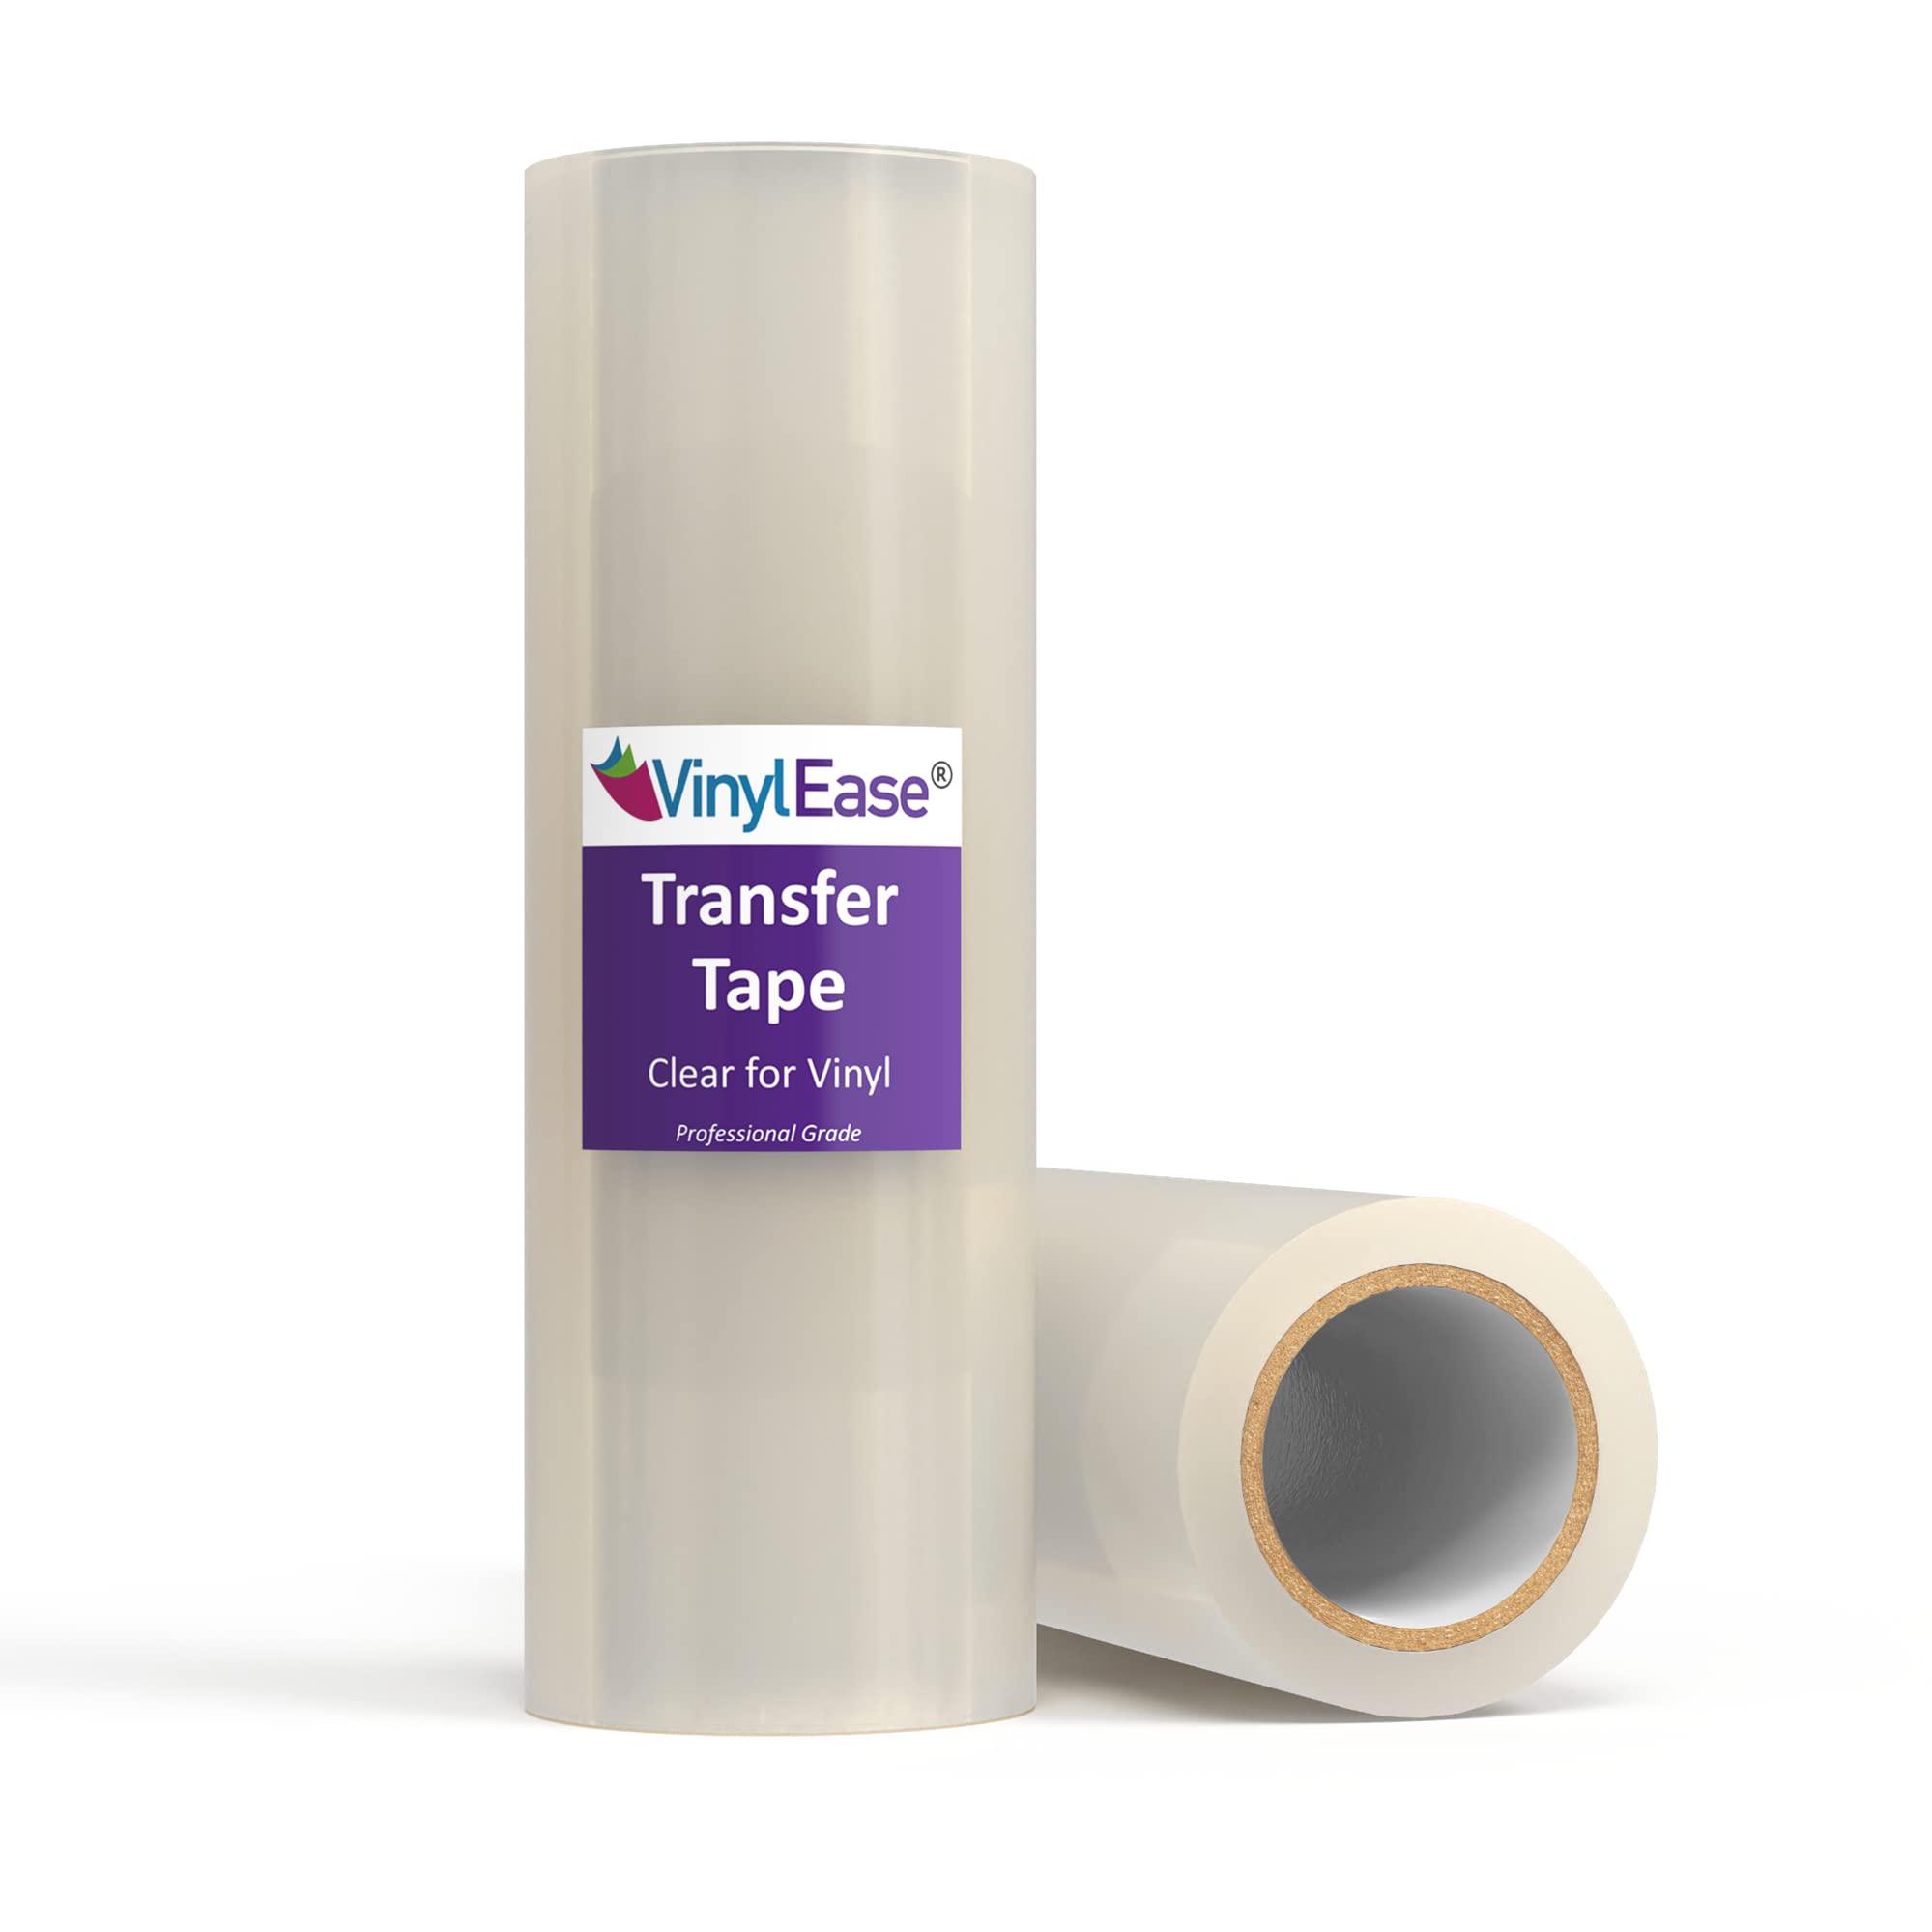 vinyl ease 12 inch x 150 feet roll of clear vinyl transfer tape with a medium tack layflat adhesive. works with a variety of 